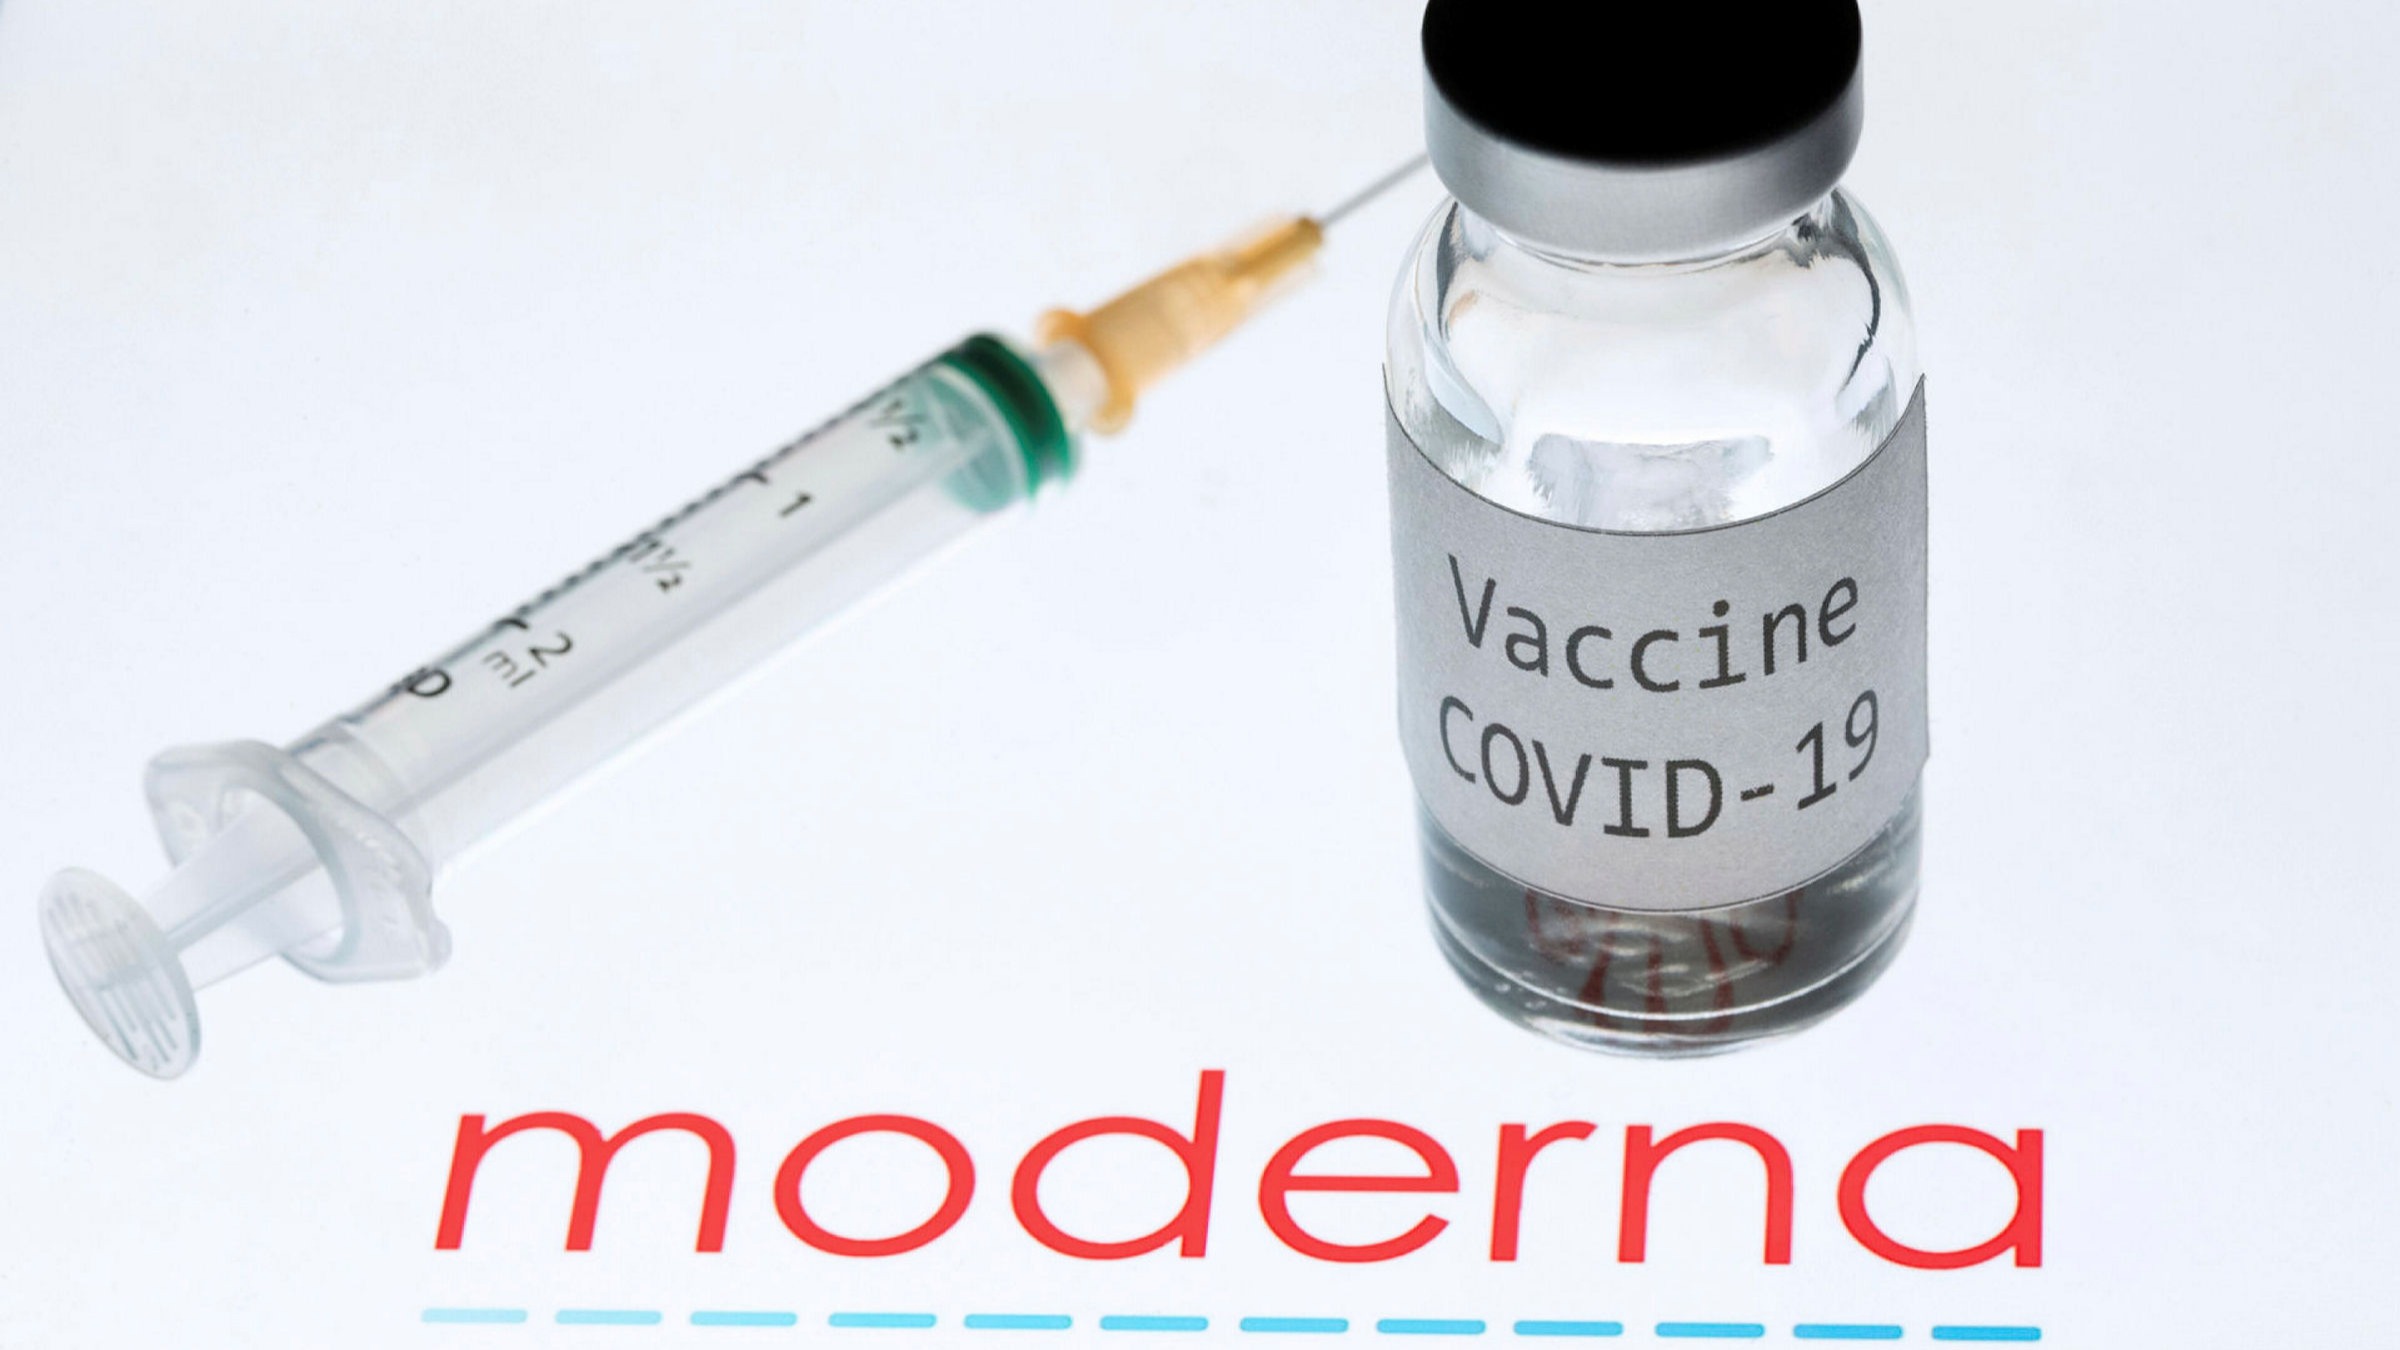 US regulator finds Moderna&#39;s Covid-19 vaccine &#39;highly effective&#39; | Financial Times